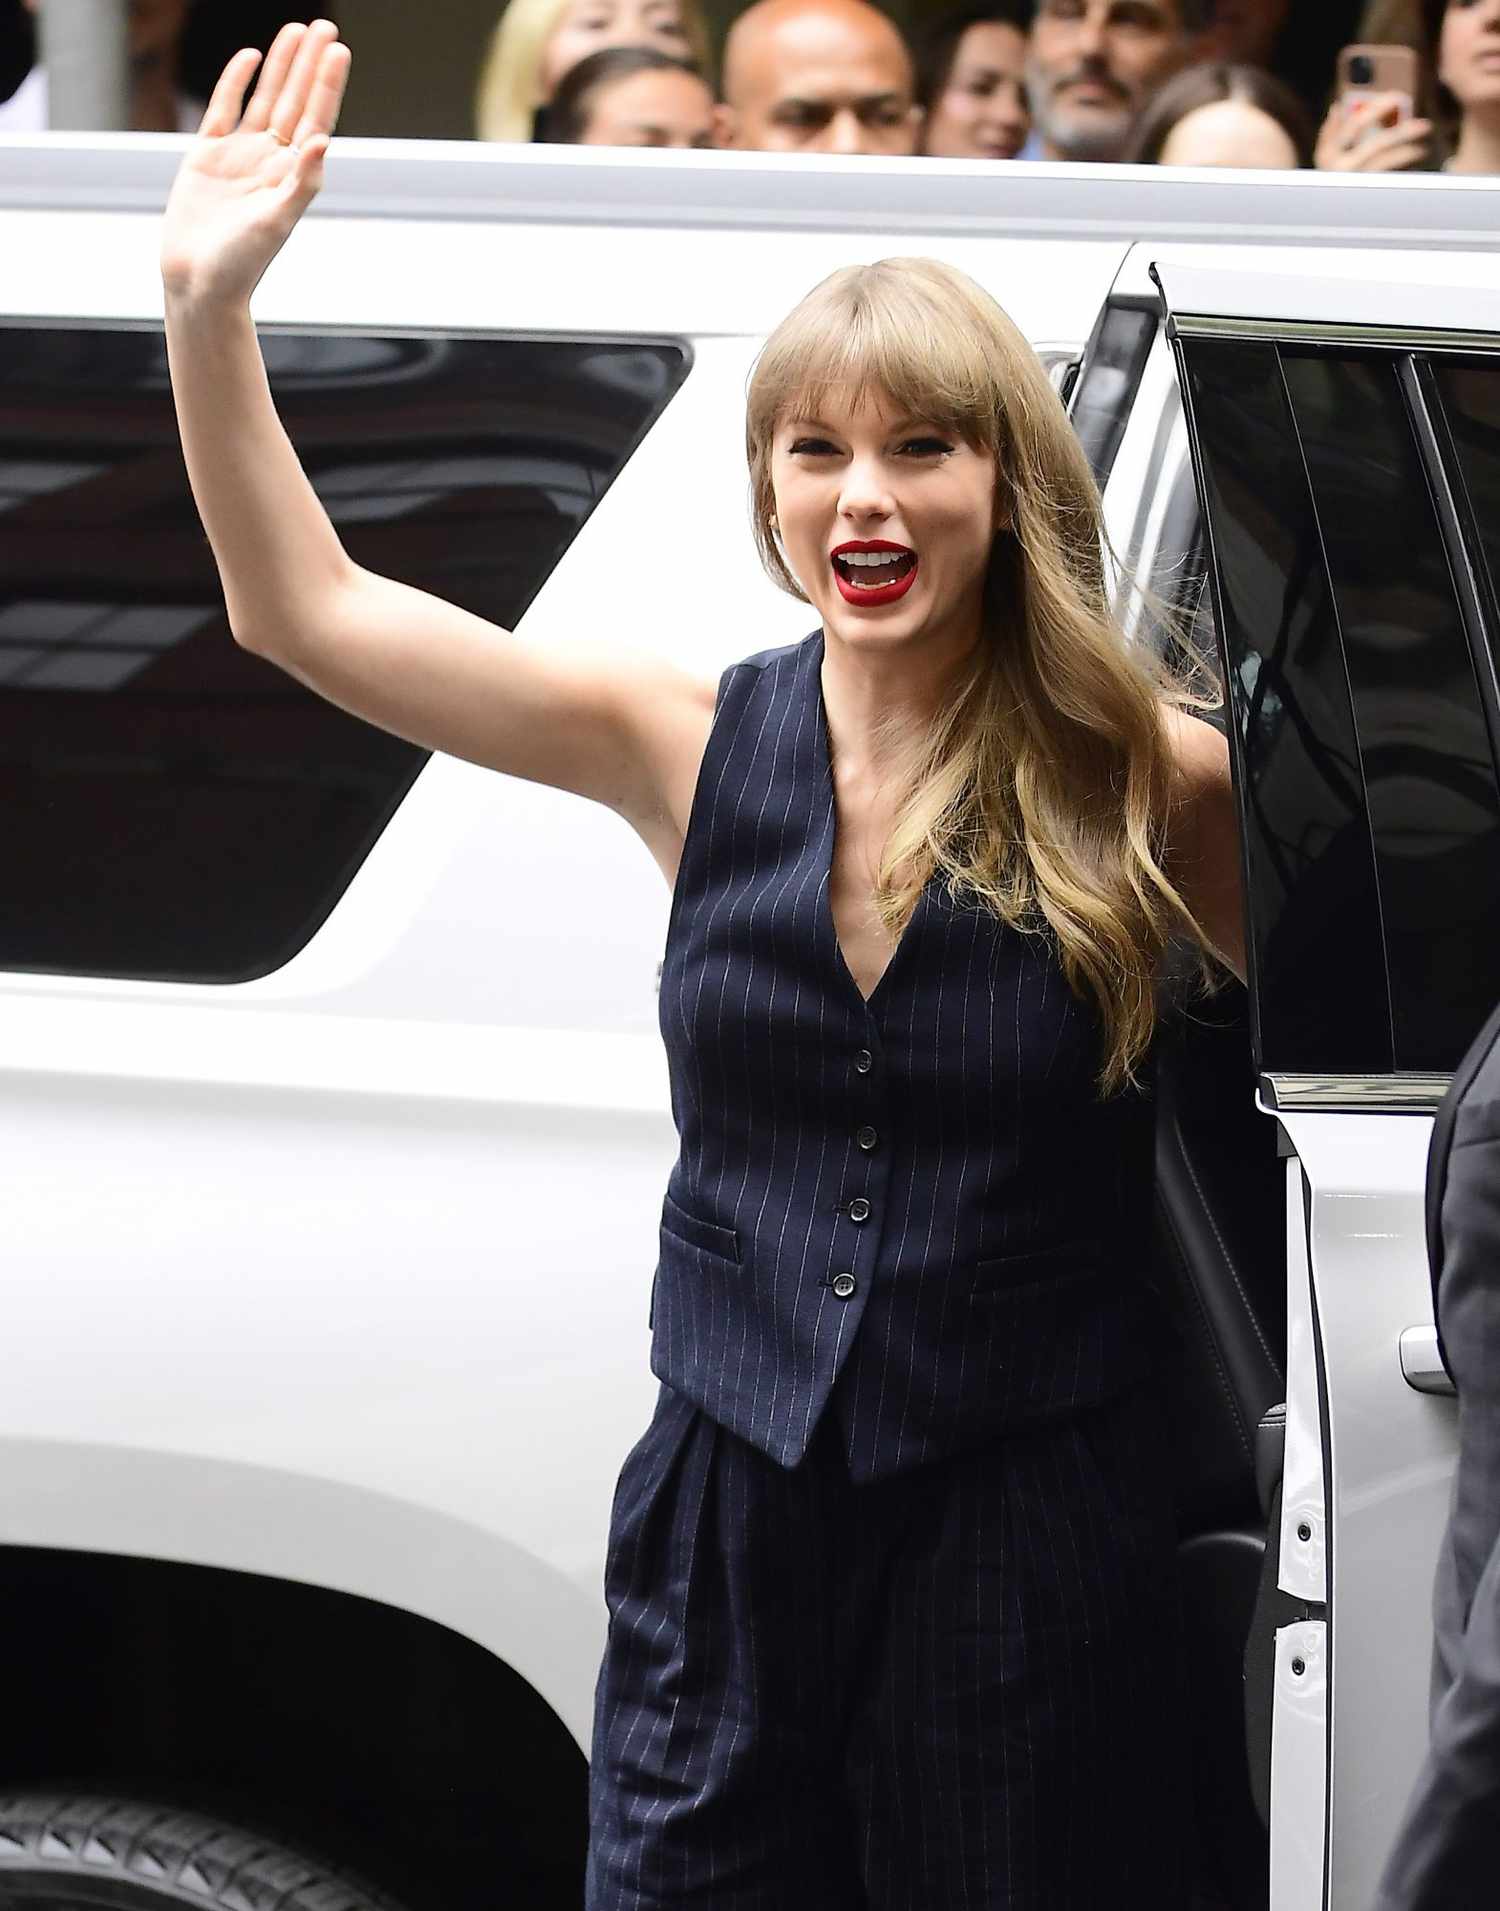 NEW YORK, NY - JUNE 11: Taylor Swift is seen outside the Beacon Theatre on June 11, 2022 in New York City. (Photo by Raymond Hall/GC Images)